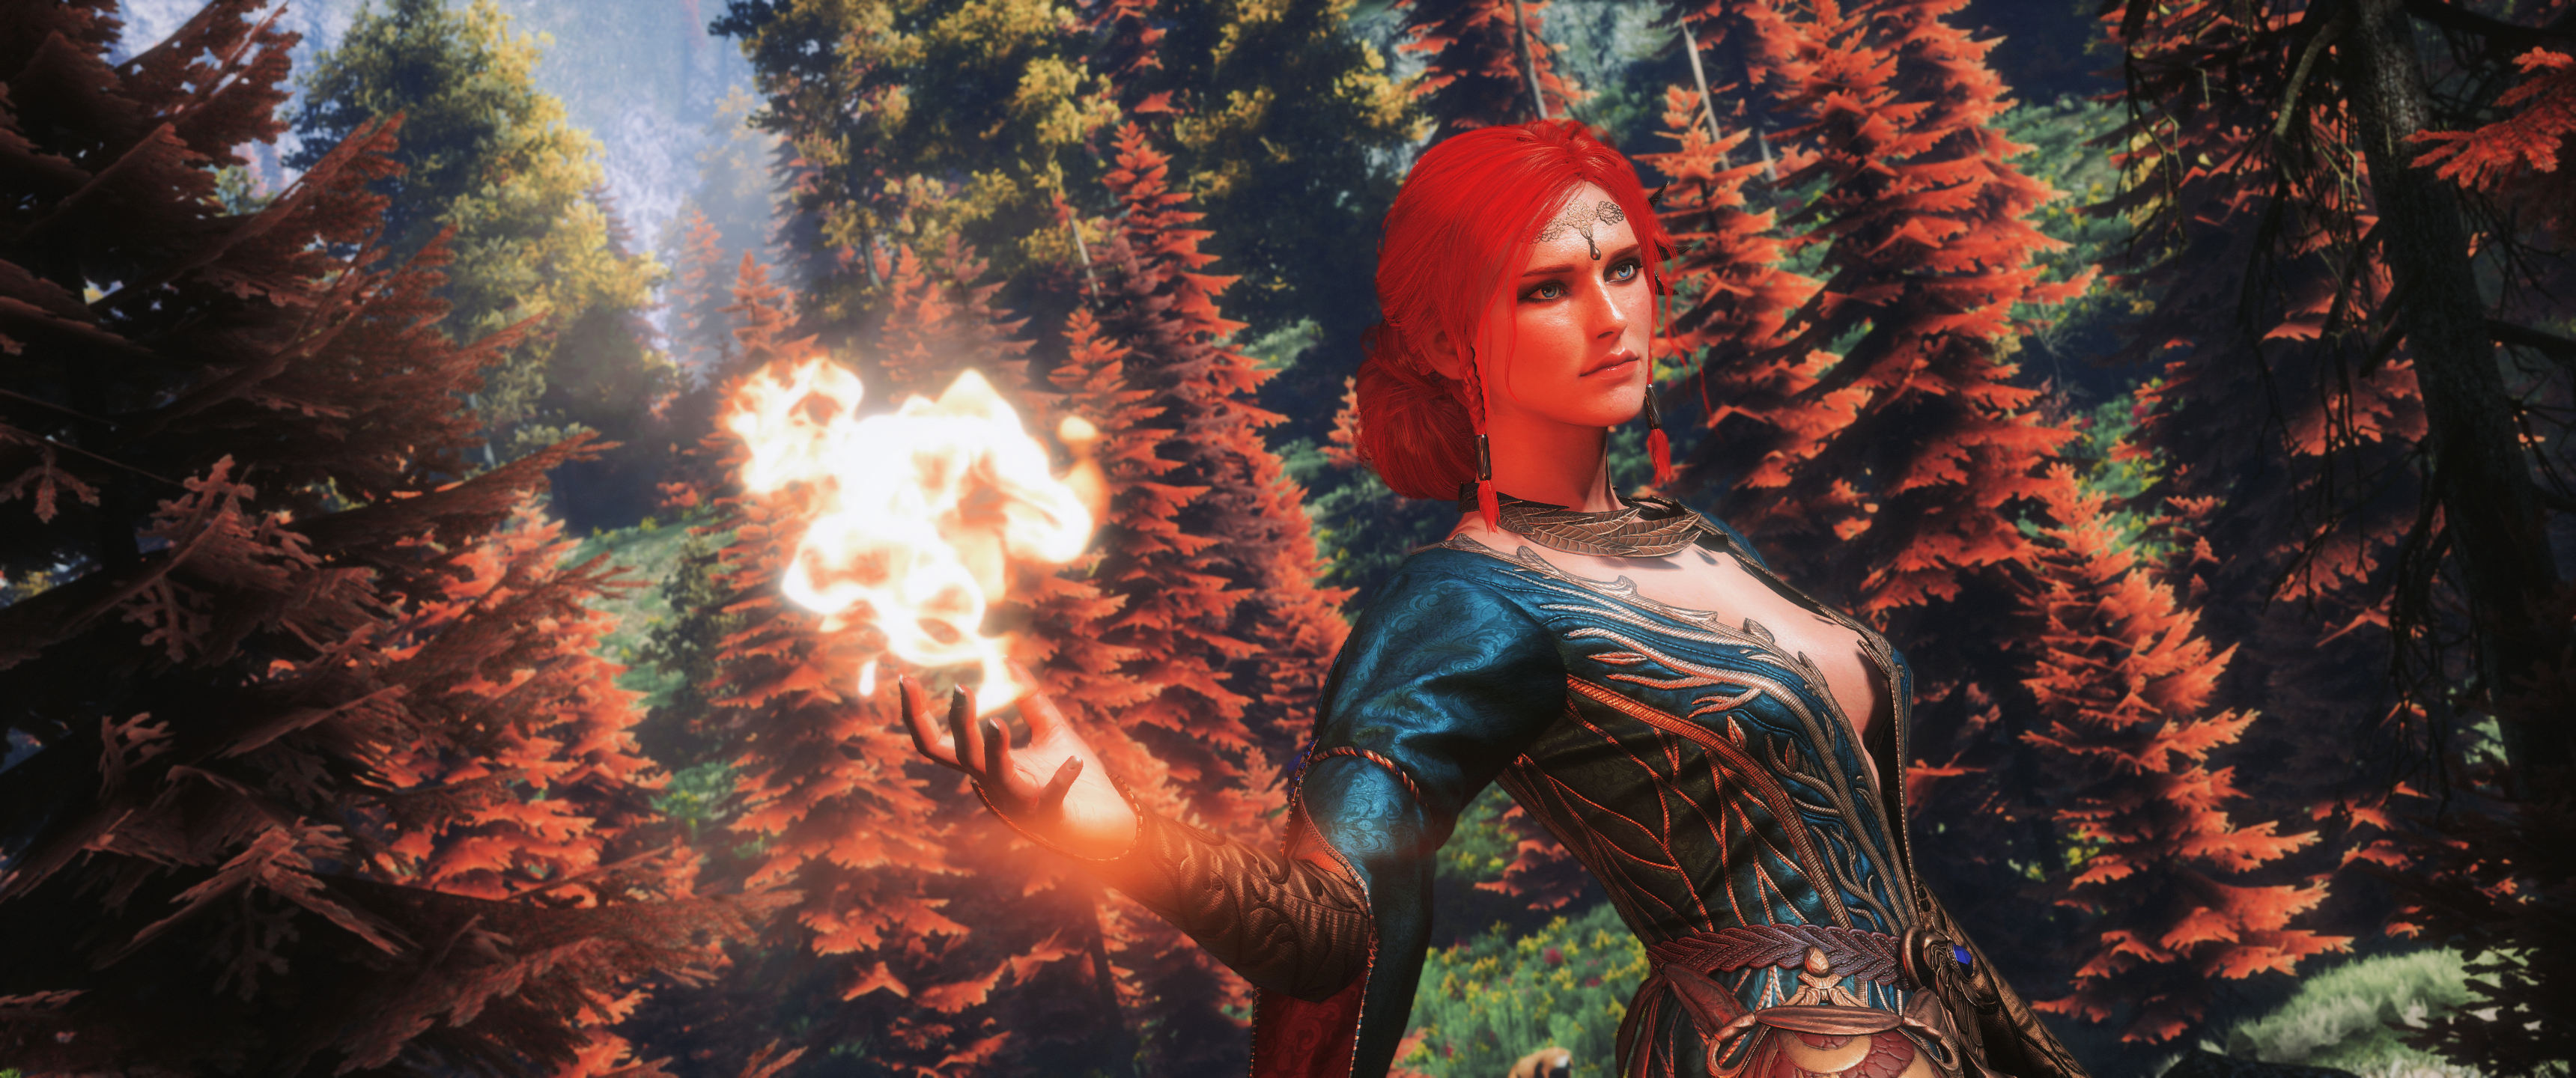 3440x1440 Wallpaper : video games, Triss Merigold, The Witcher starbeat 1384919 HD Wallpapers